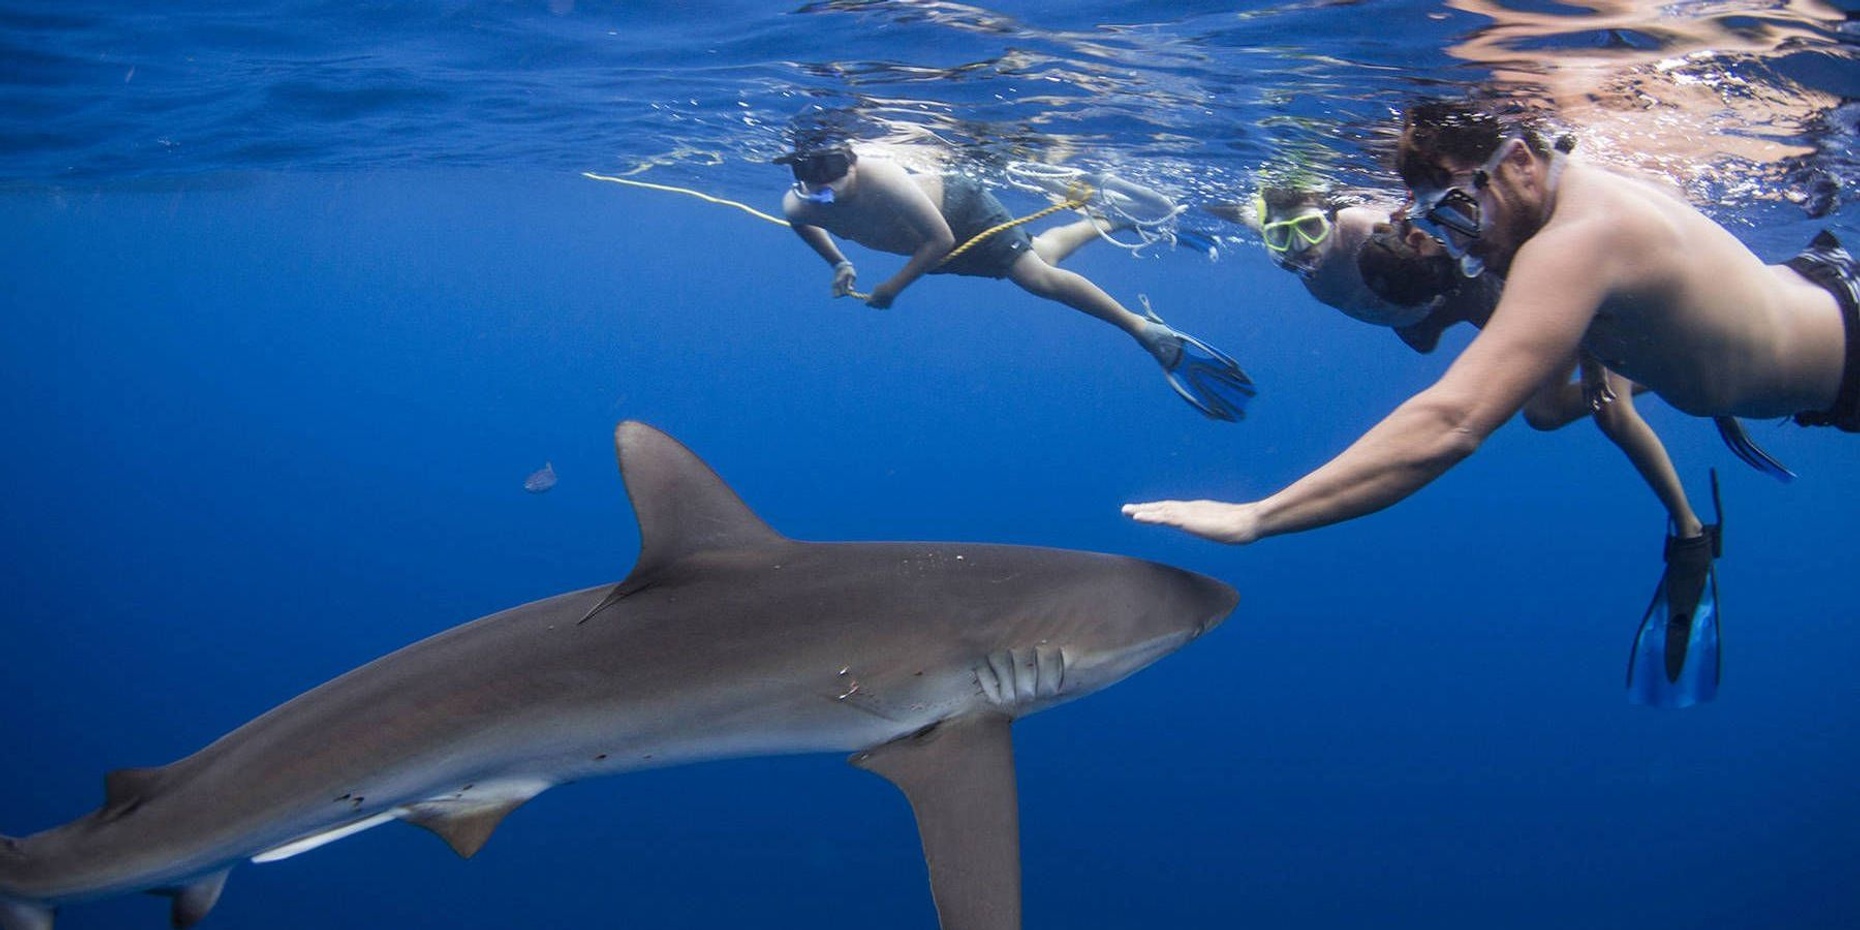 Snorkeling Adventure with Sharks in Cabo San Lucas